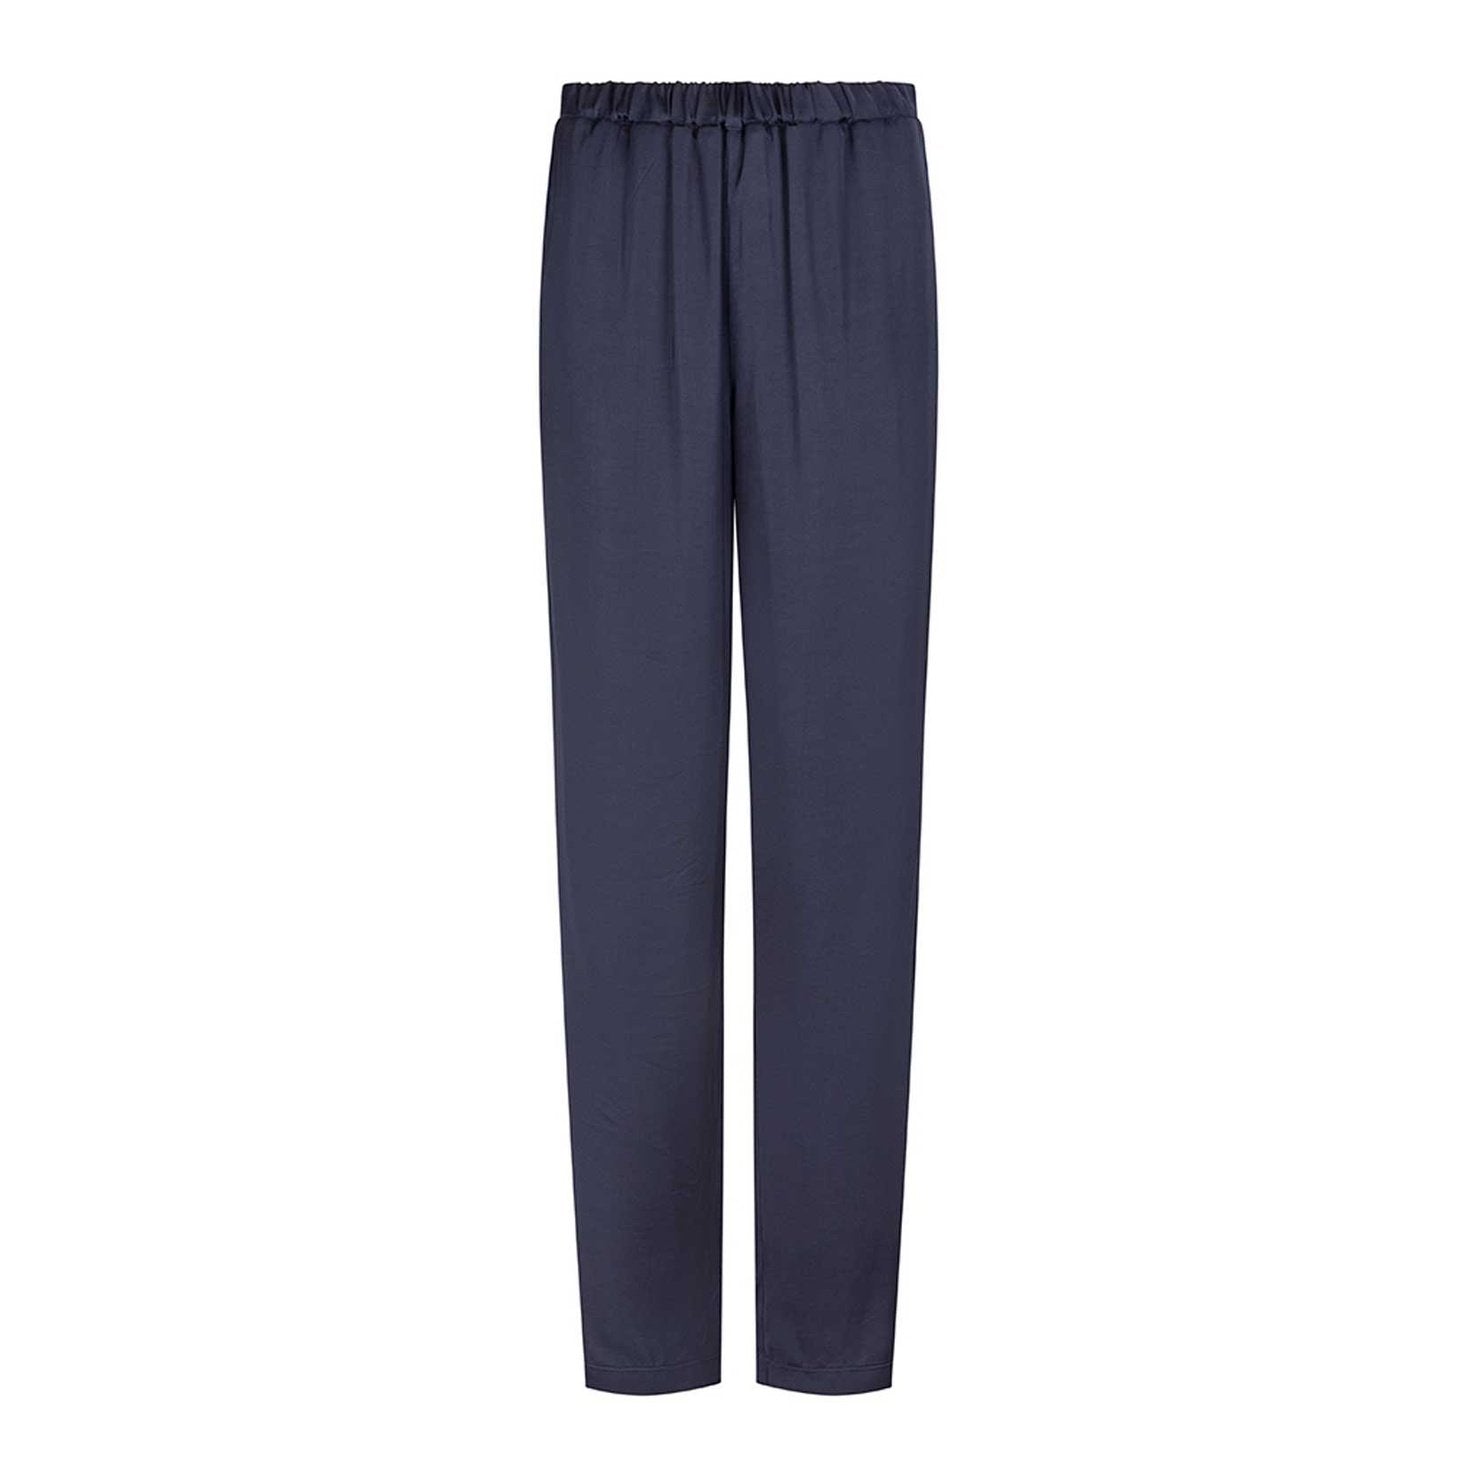 RYBIE TROUSERS - rubytuesday-store